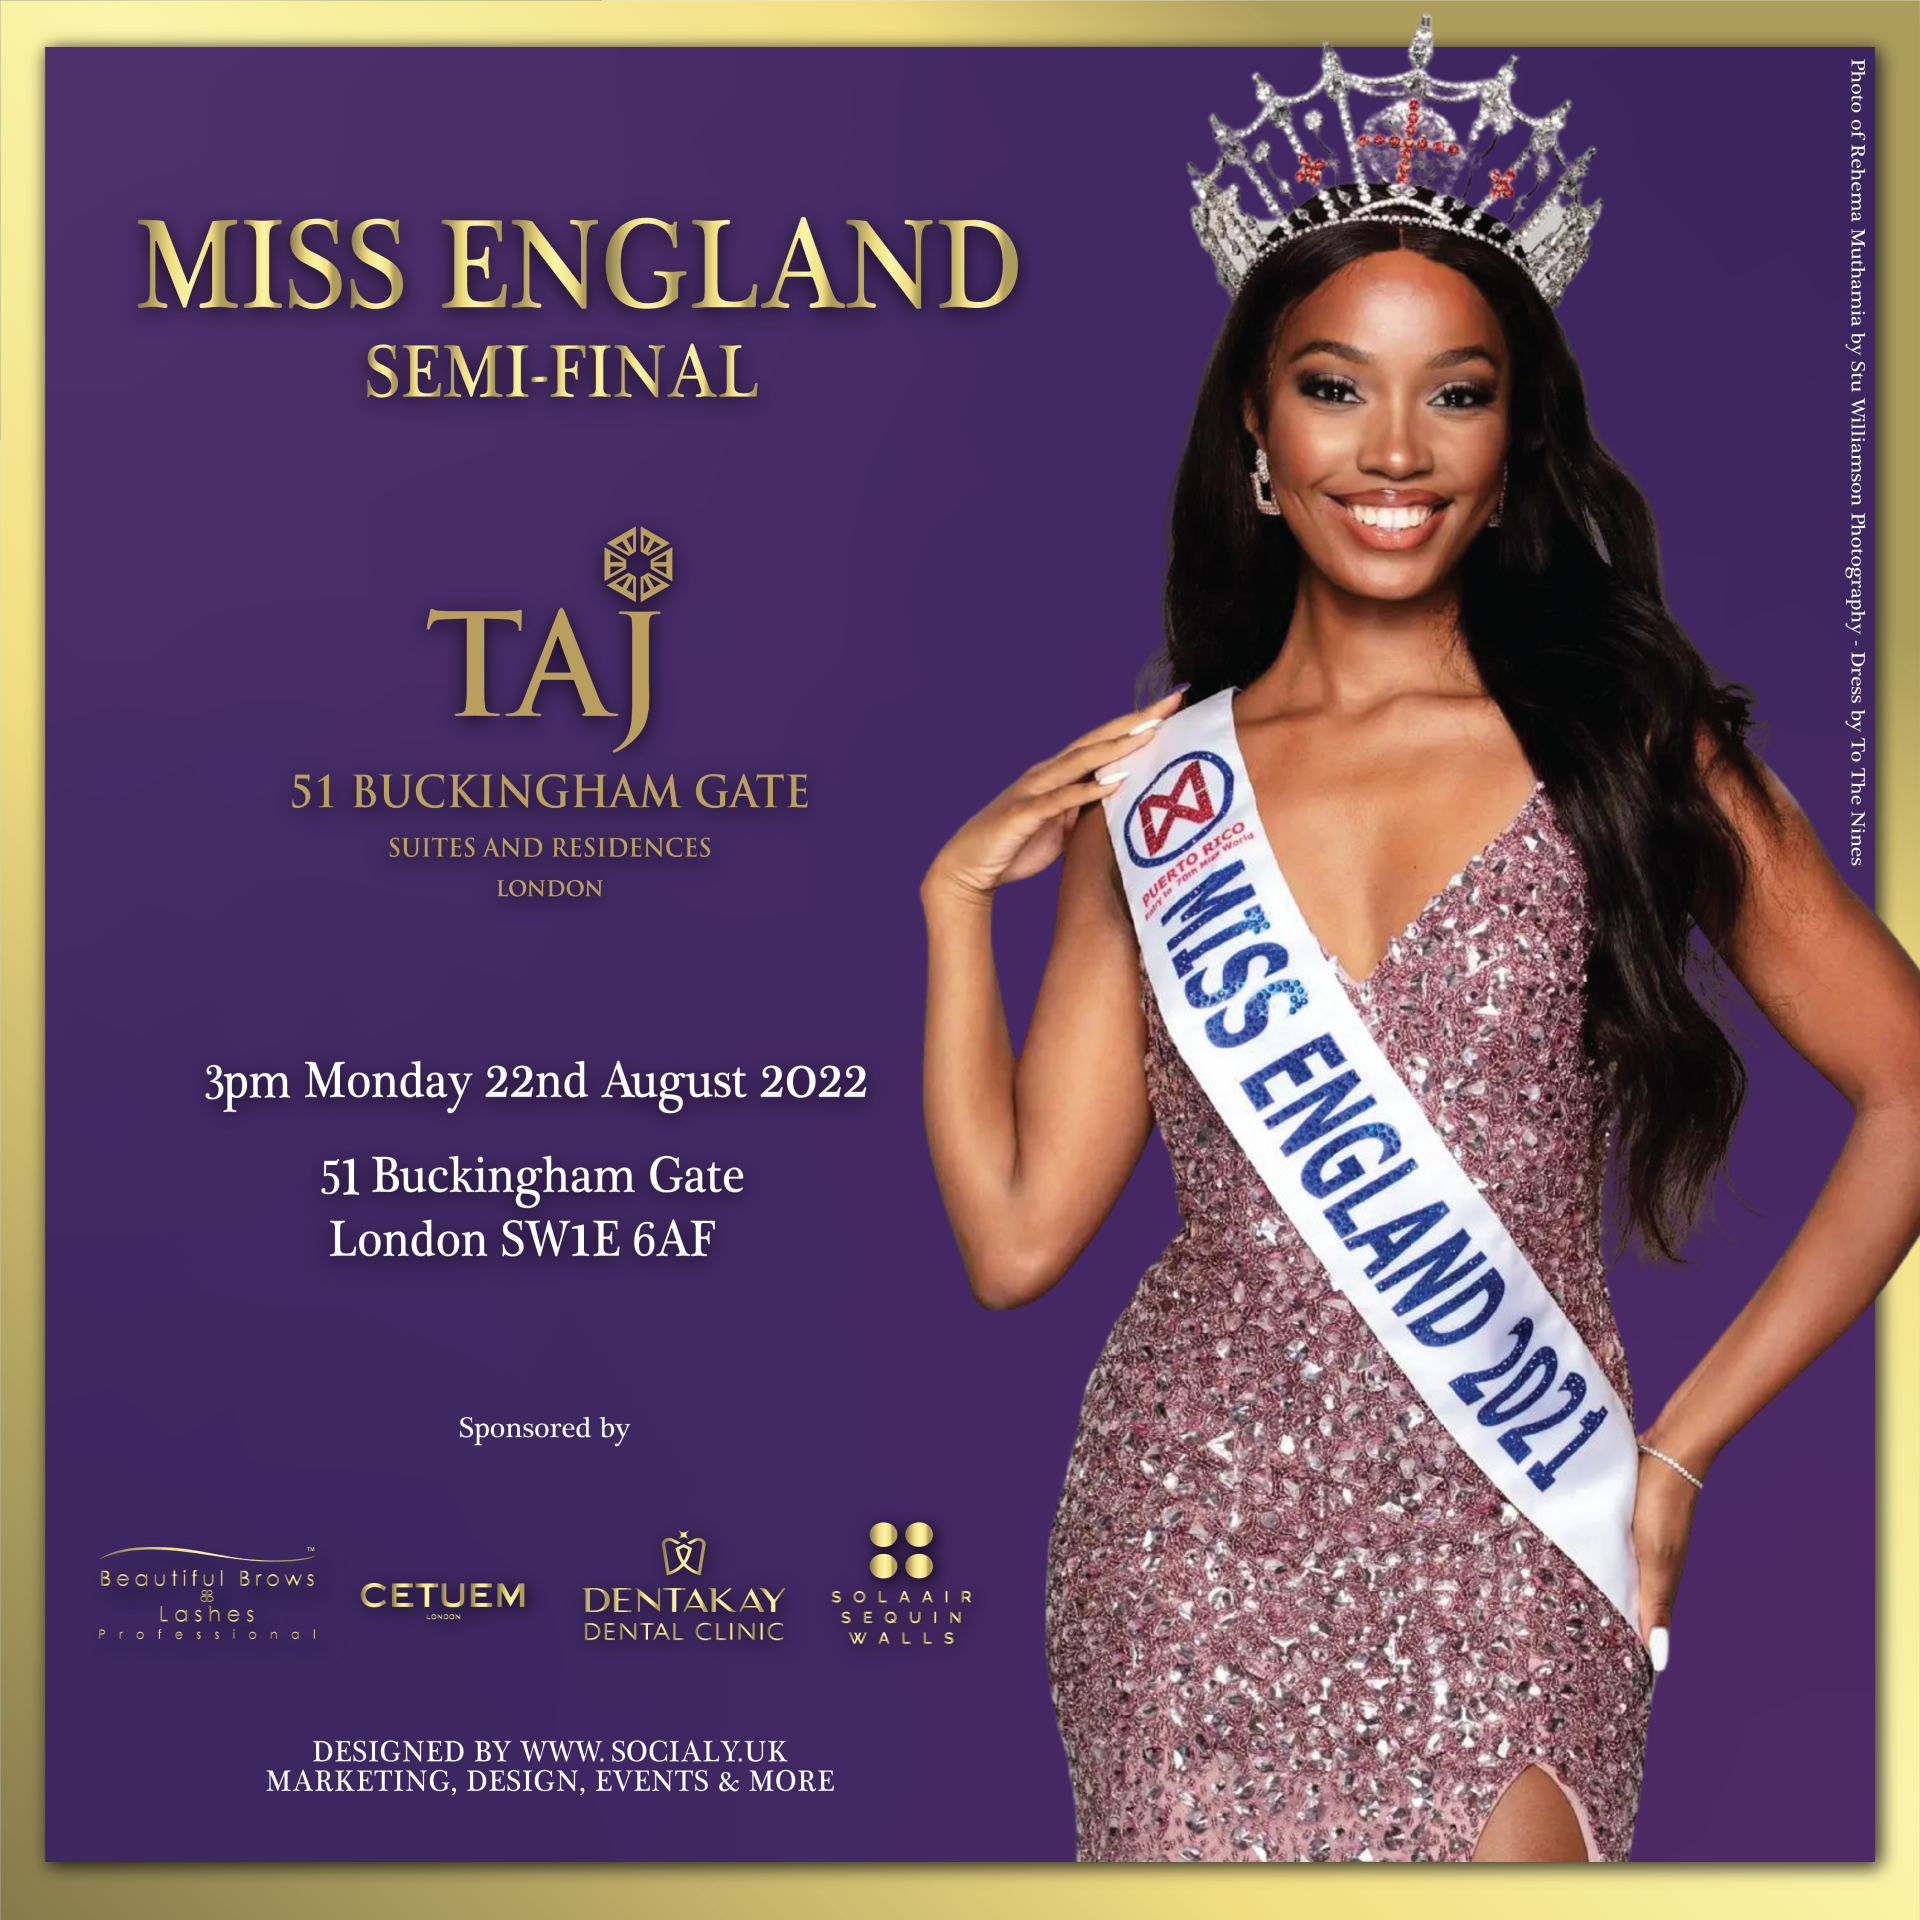 New Flyer designed for the Miss England semi final by Socialy.uk